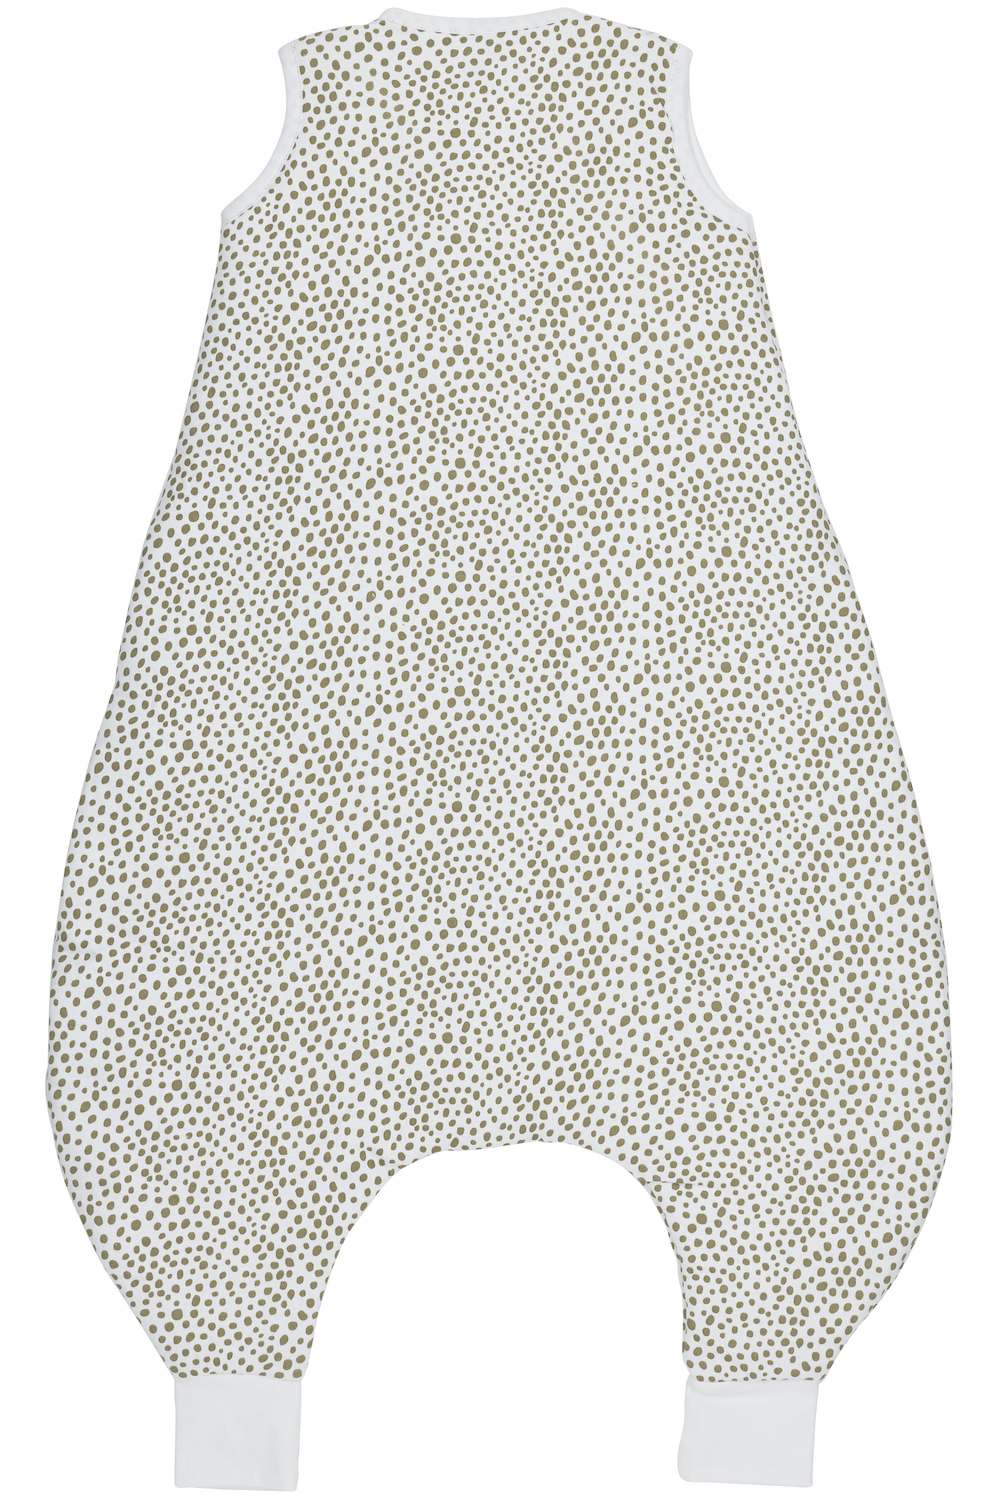 Baby winter slaapoverall jumper Cheetah - taupe - 80cm